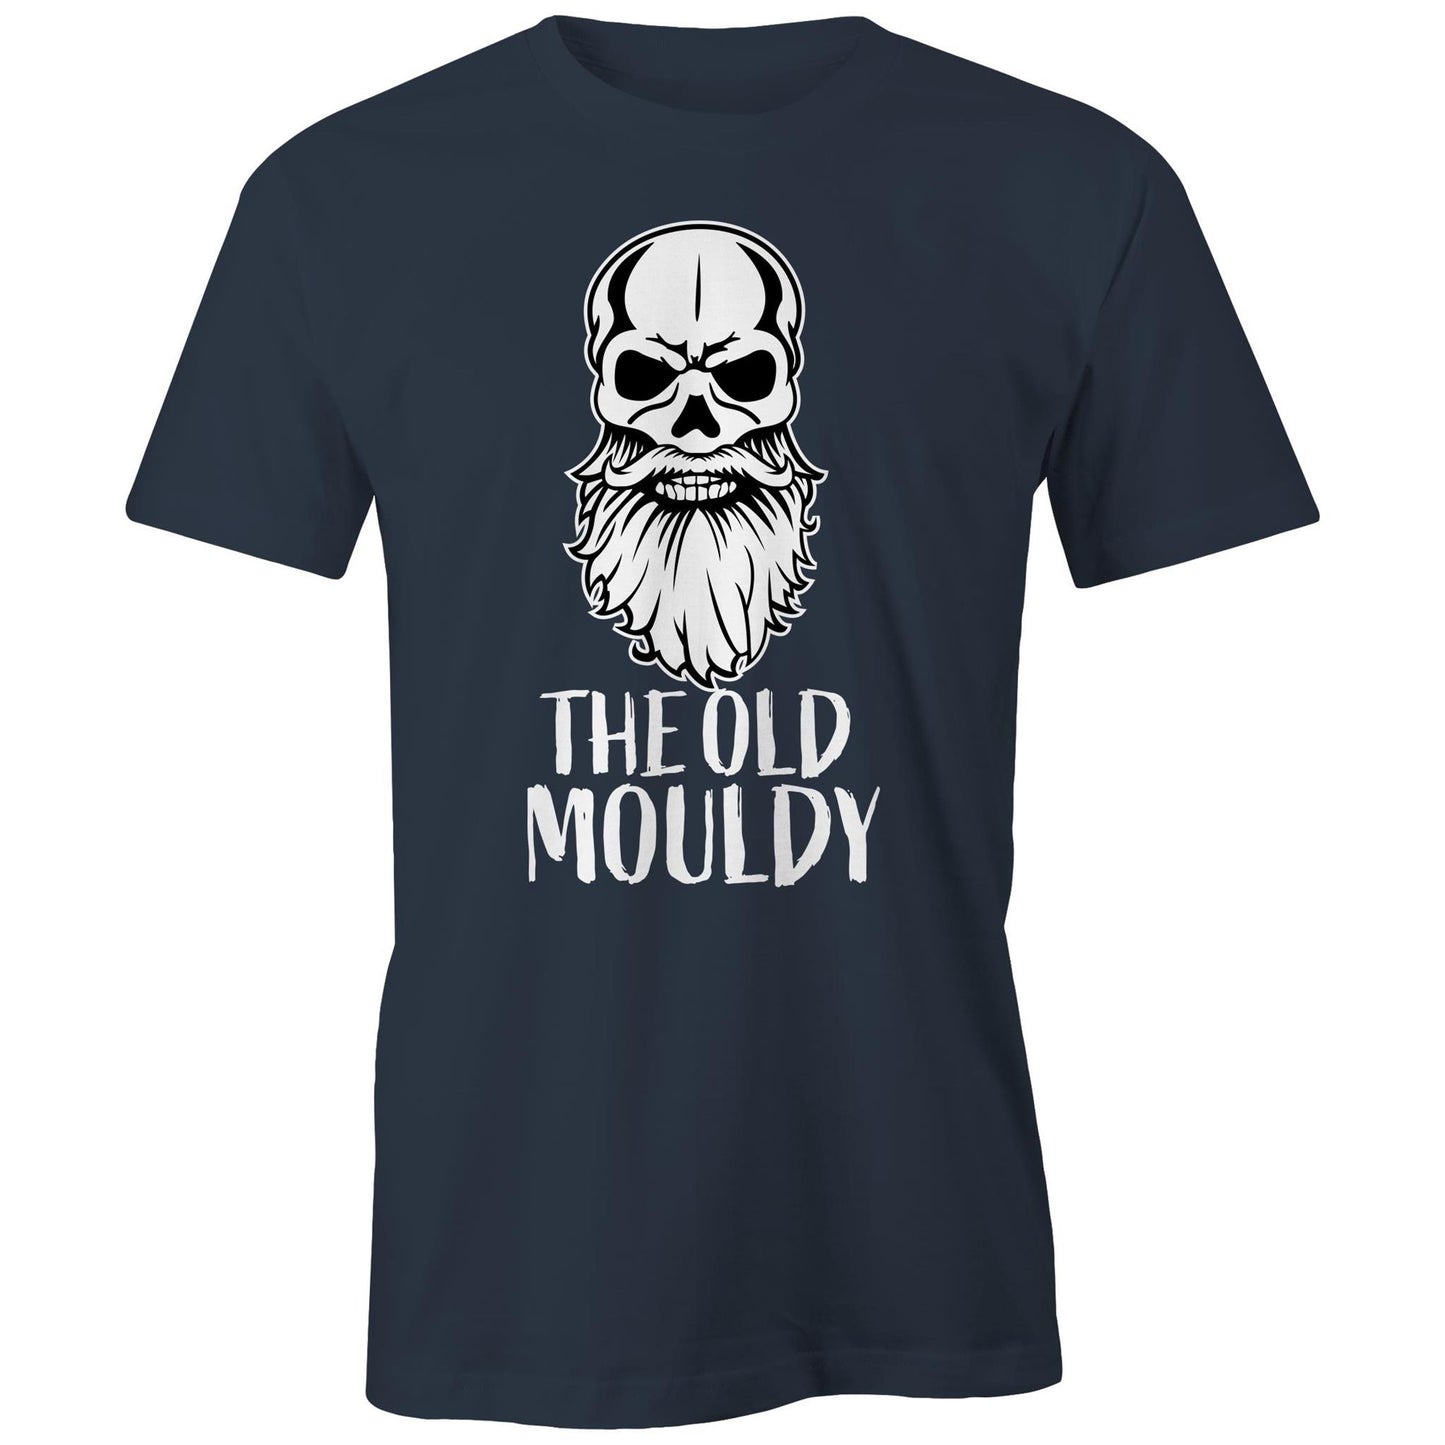 The Old Mouldy (AS Colour - Classic Tee)